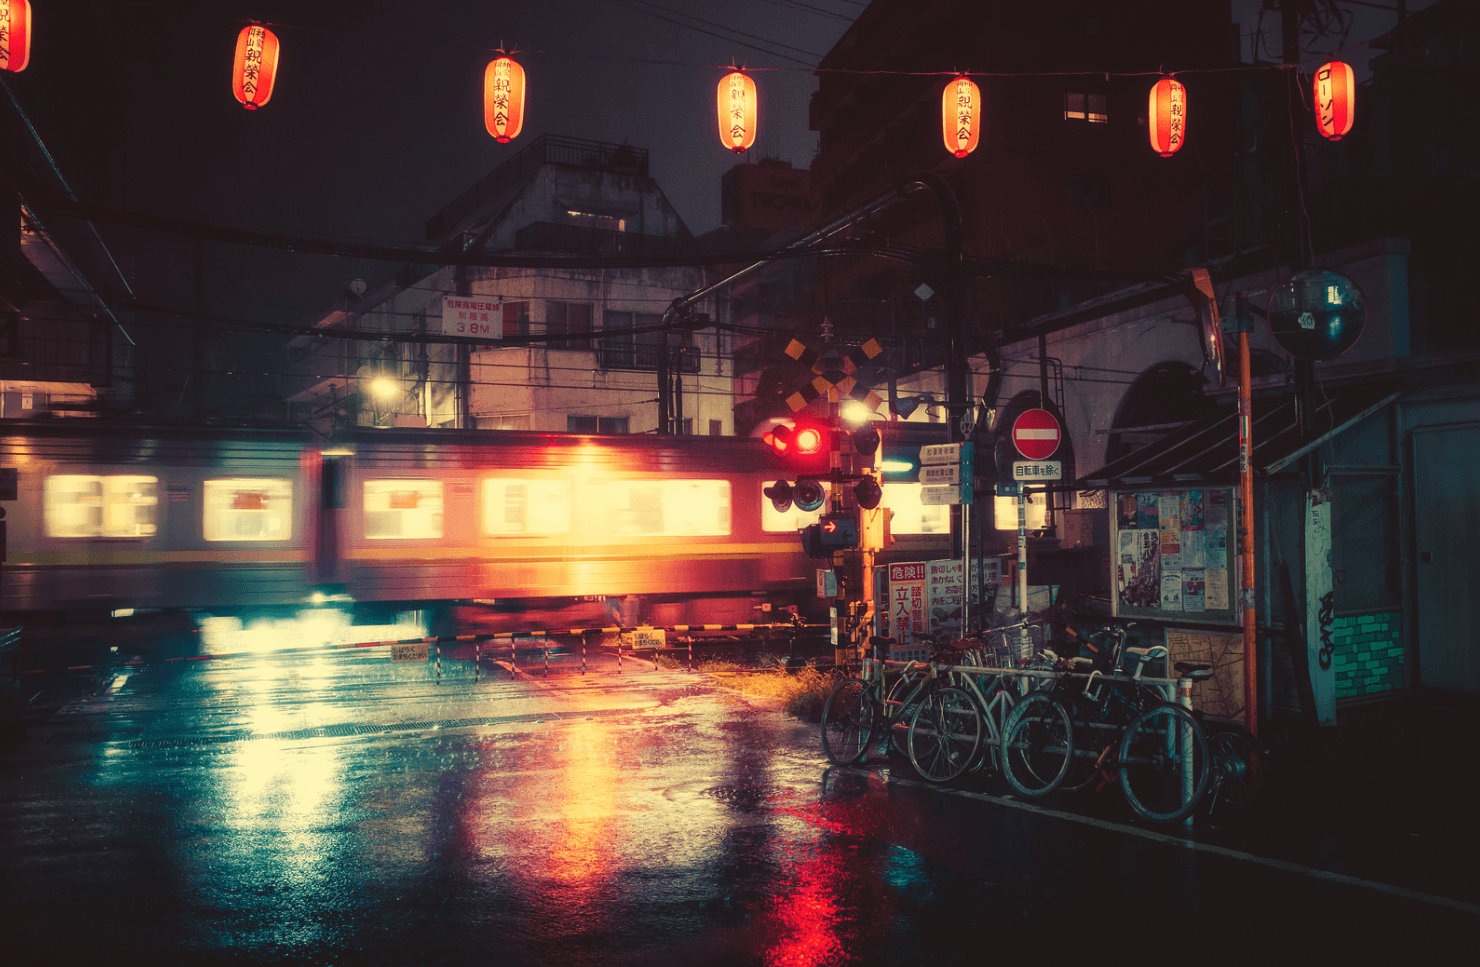 These Night Life Photos Of Tokyo Look Like They Came Straight Out Of An